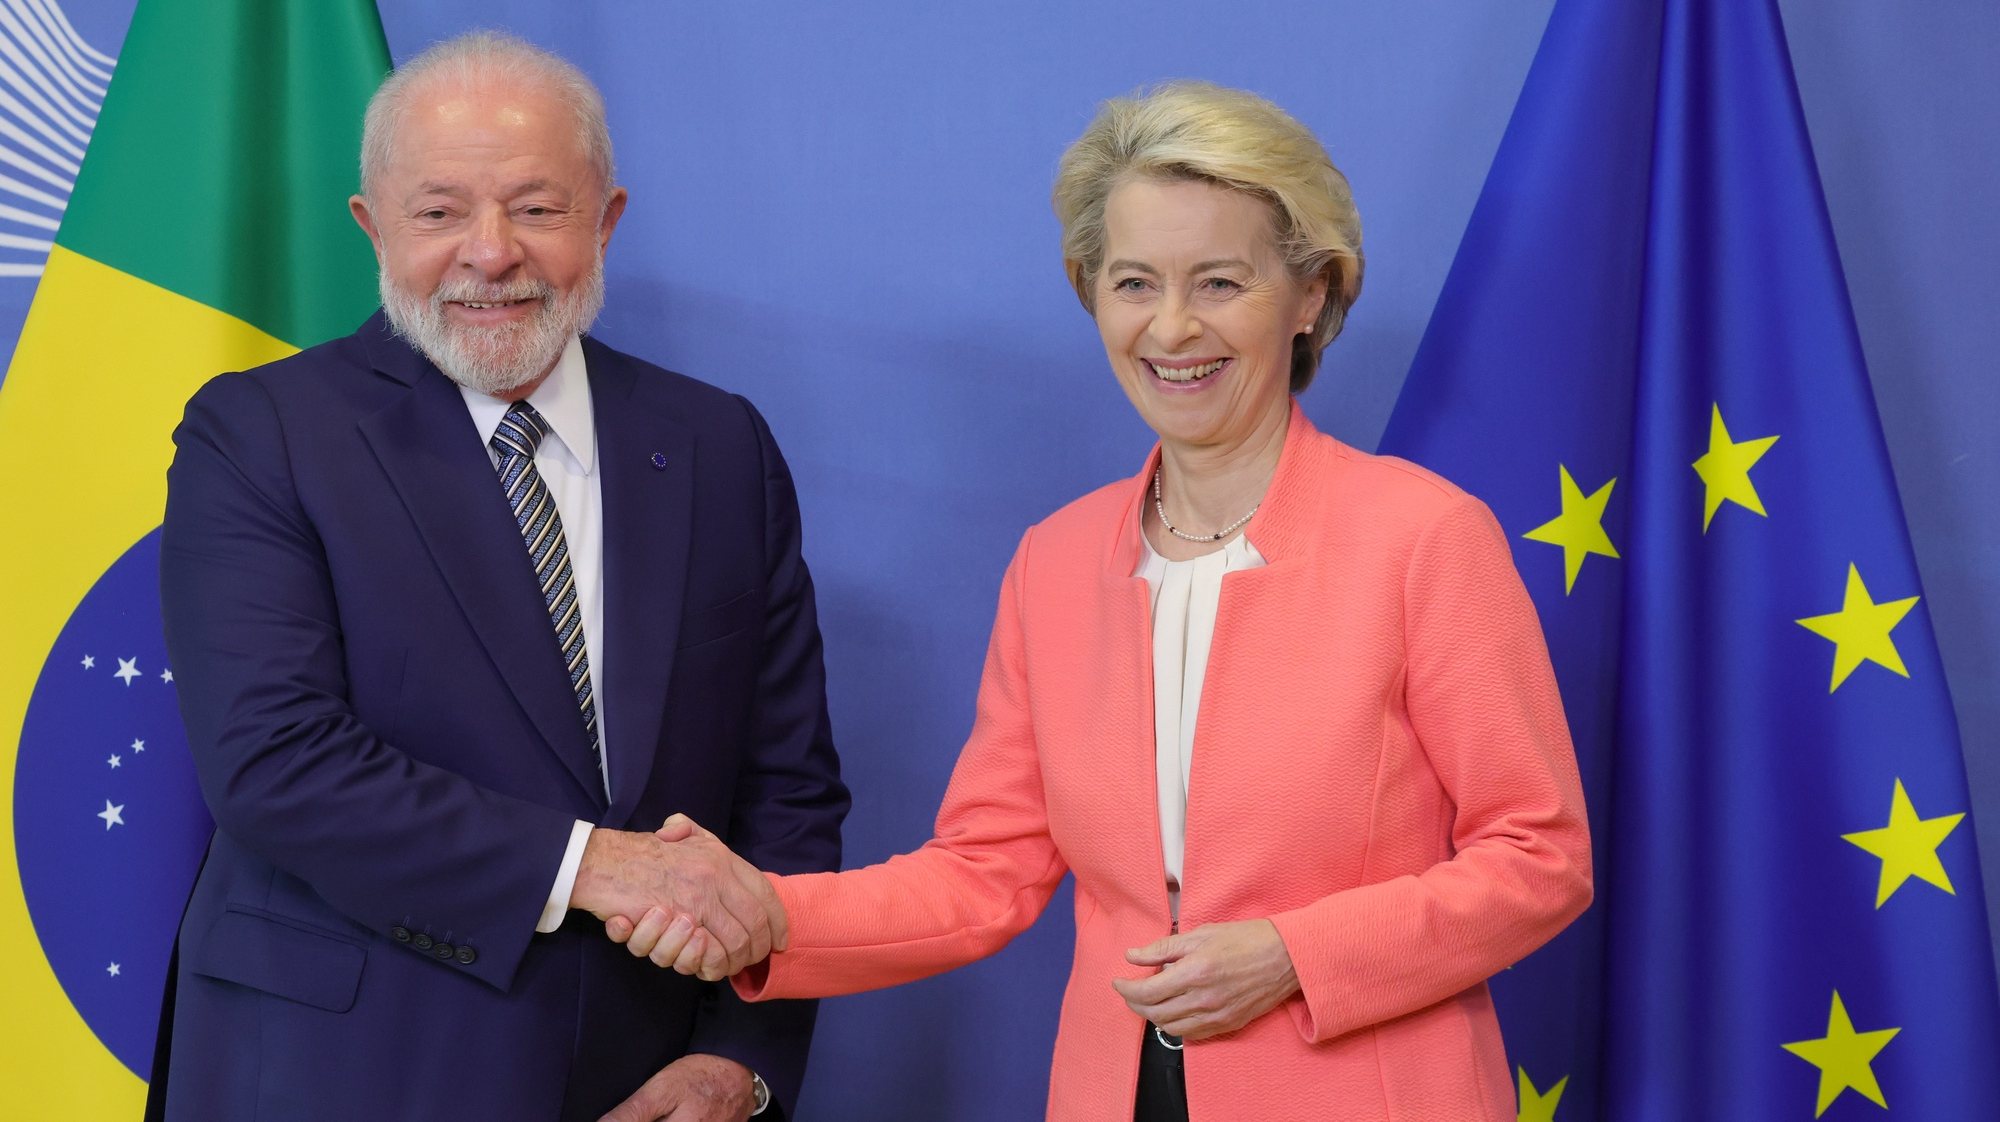 epa10750950 President of the European Commission Ursula von der Leyen (R) welcomes Brazil&#039;s President Luiz Inacio Lula da Silva (L) in Brussels, Belgium, 17 July 2023, on the day of the third EU-CELAC summit between leaders from the EU and the Community of Latin American and Caribbean States (CELAC).  EPA/OLIVIER MATTHYS